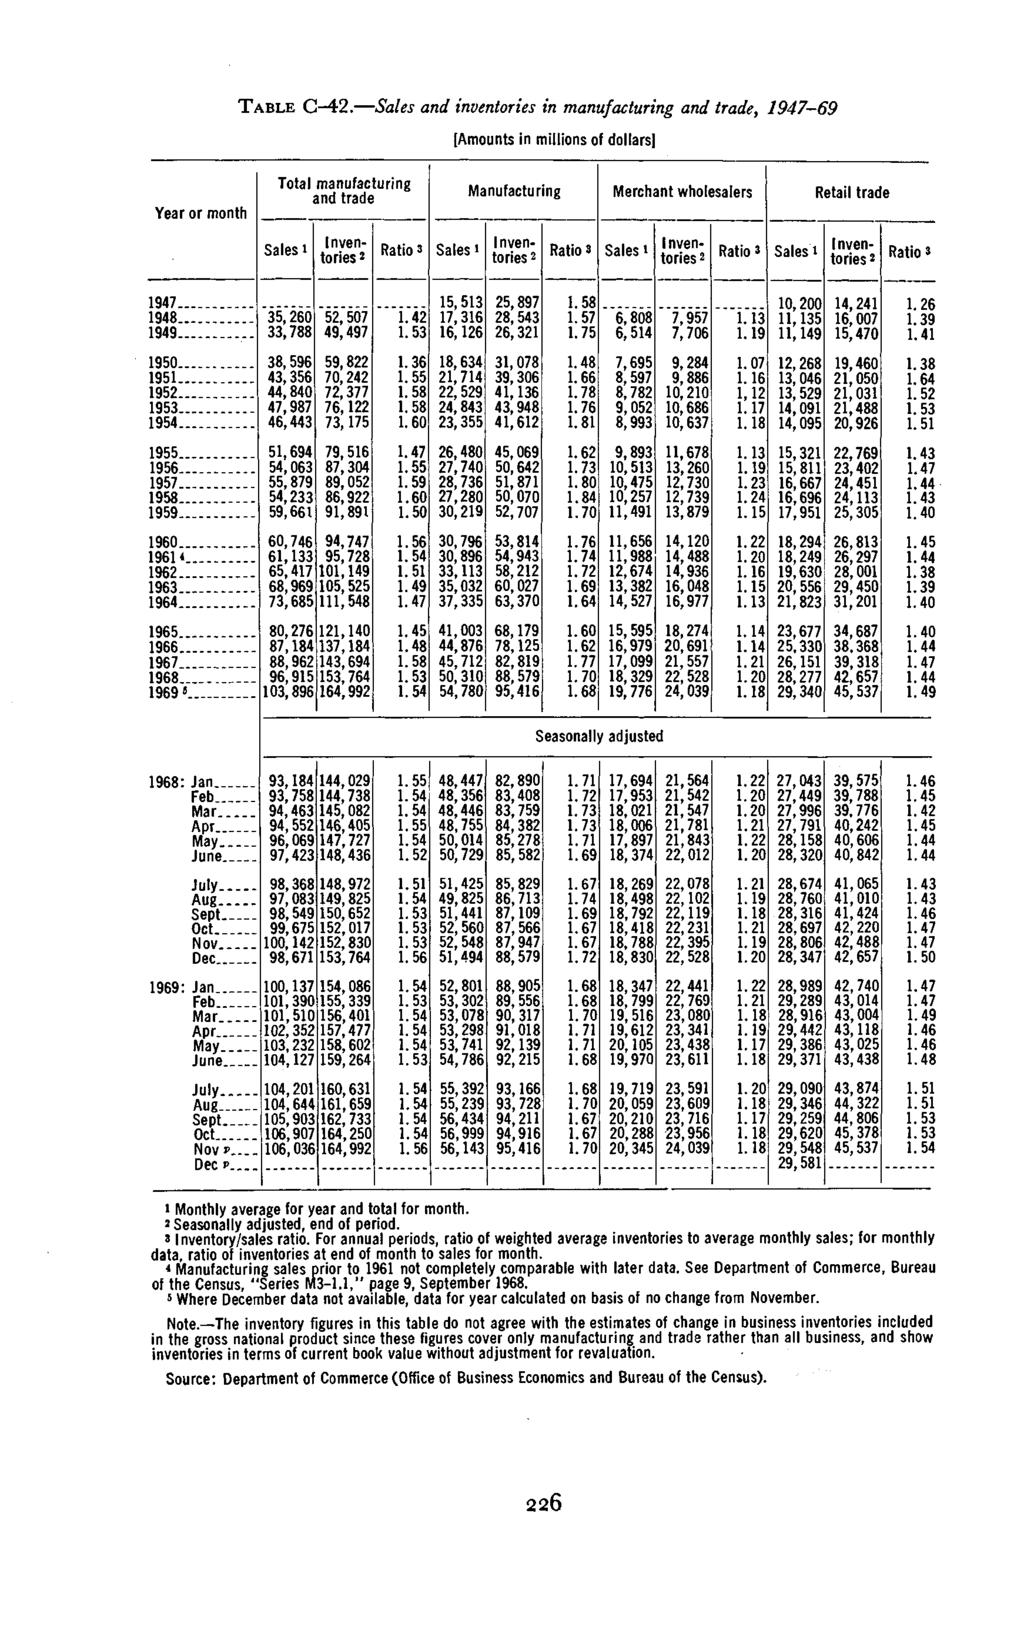 1970 TABLE C-4. and inventories in manufacturing, 1947-69 Inyentories i 1947 1948 1949 1950 1951 195 1953 1954 1955 1956 1957 1958 1959 35,60 54,33 5,507 59,8 70,4 7,377,1 89,05 86,9 1.